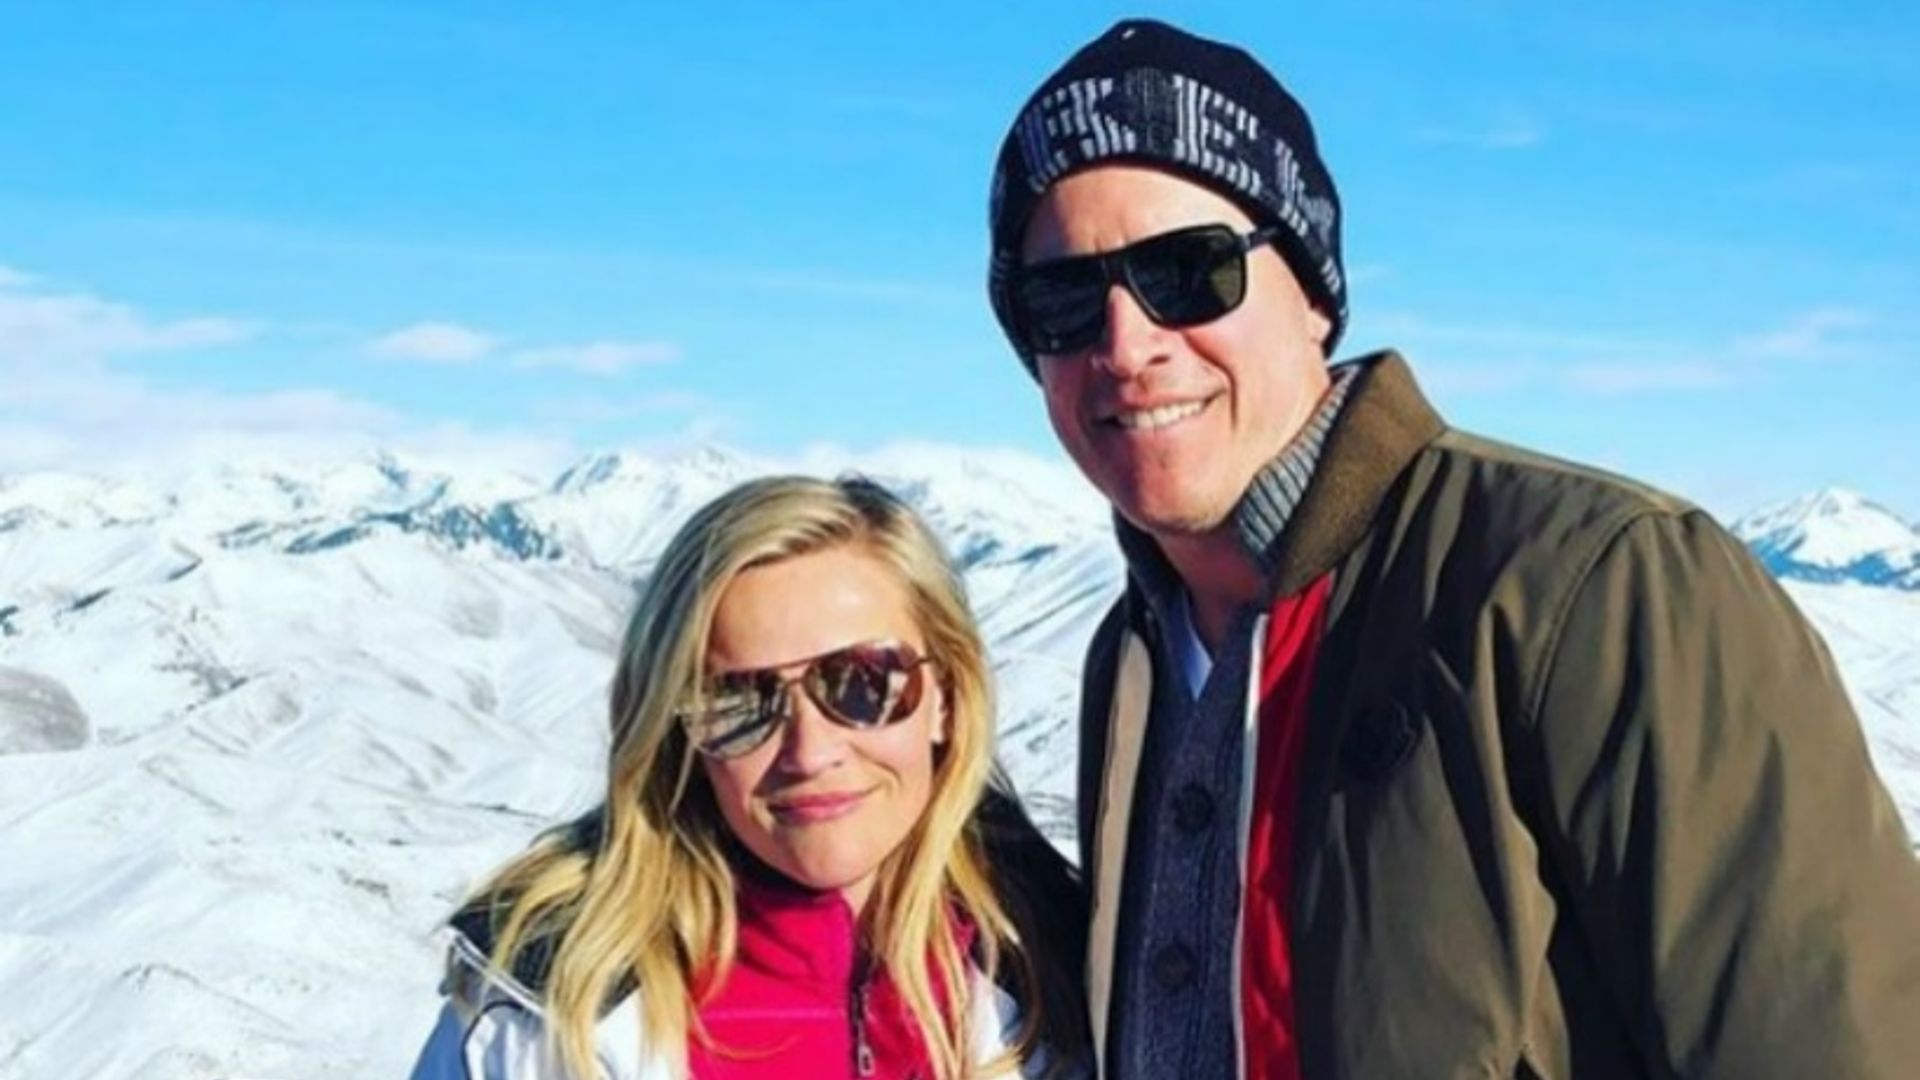 Reese Witherspoon Jim Toth skiing